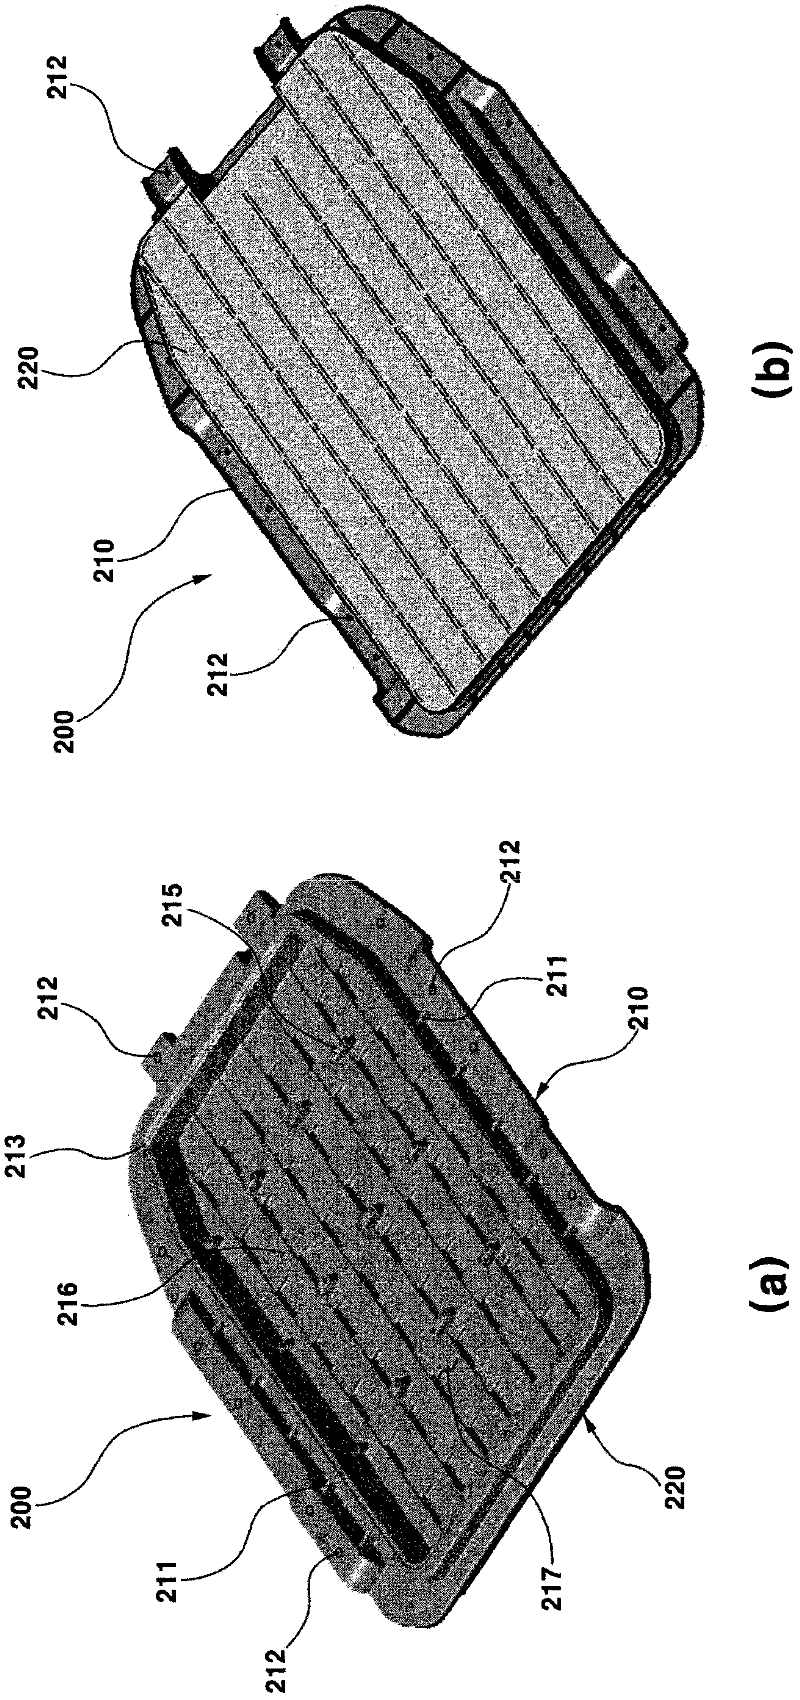 Battery pack housing assembly for electric vehicle using plastic composite material